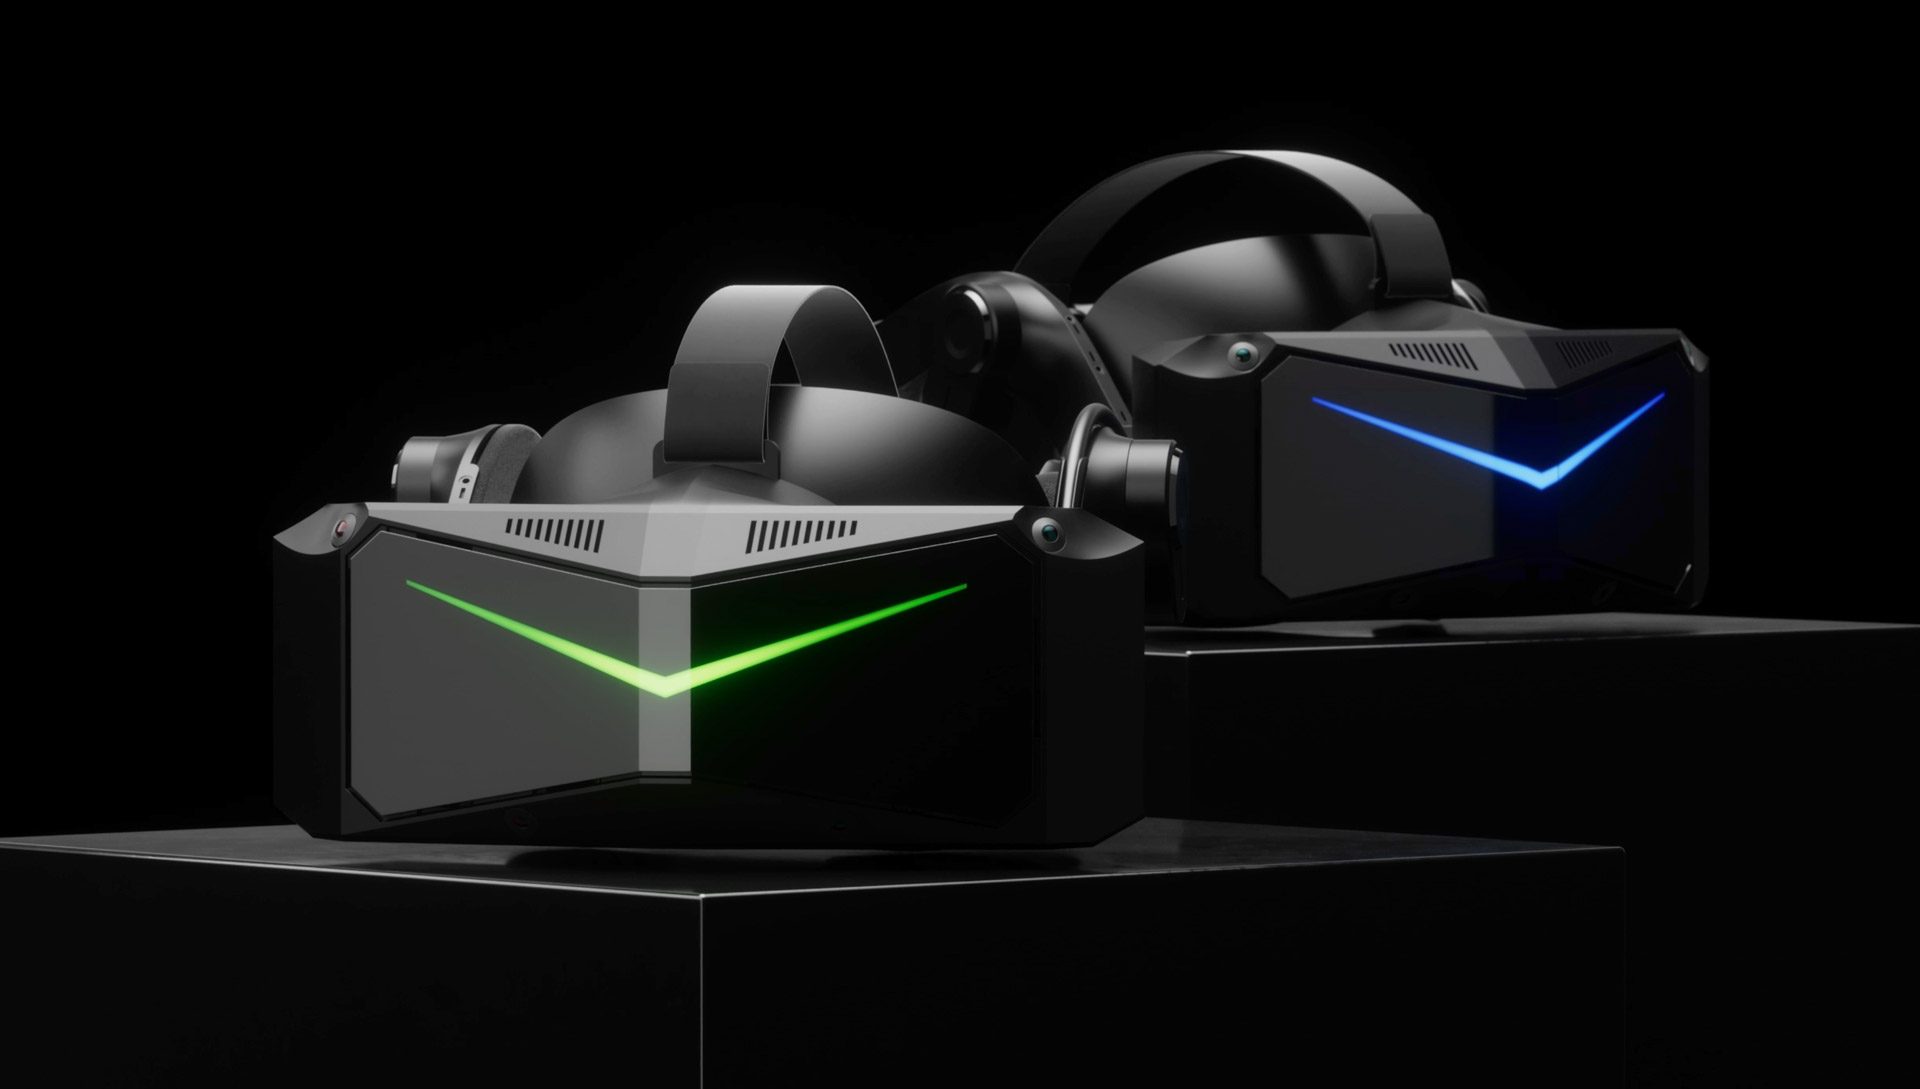 Pimax Announces Crystal Light and Crystal Super PC VR Headsets